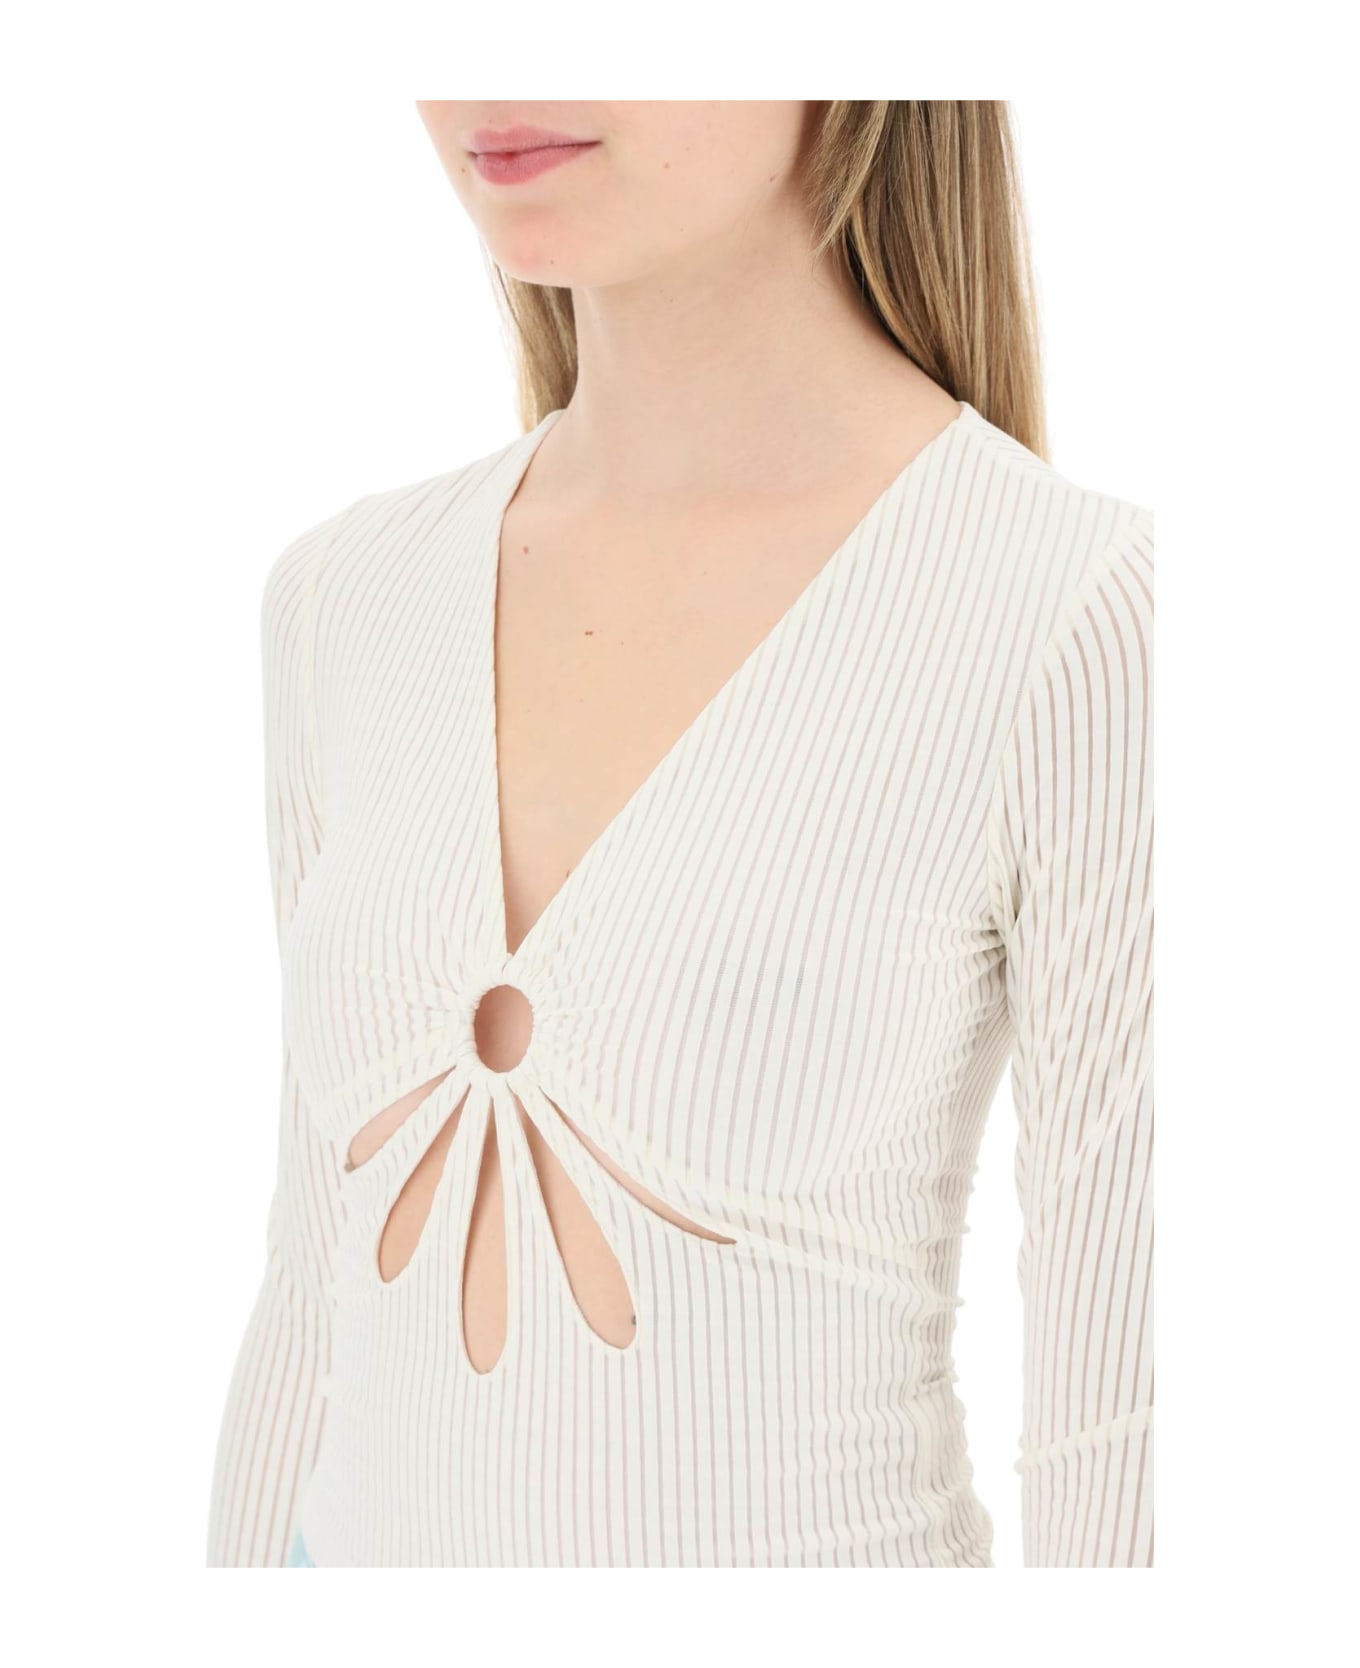 Collina Strada 'flower' Top With Cut Outs - SHEERSUCKER (White)